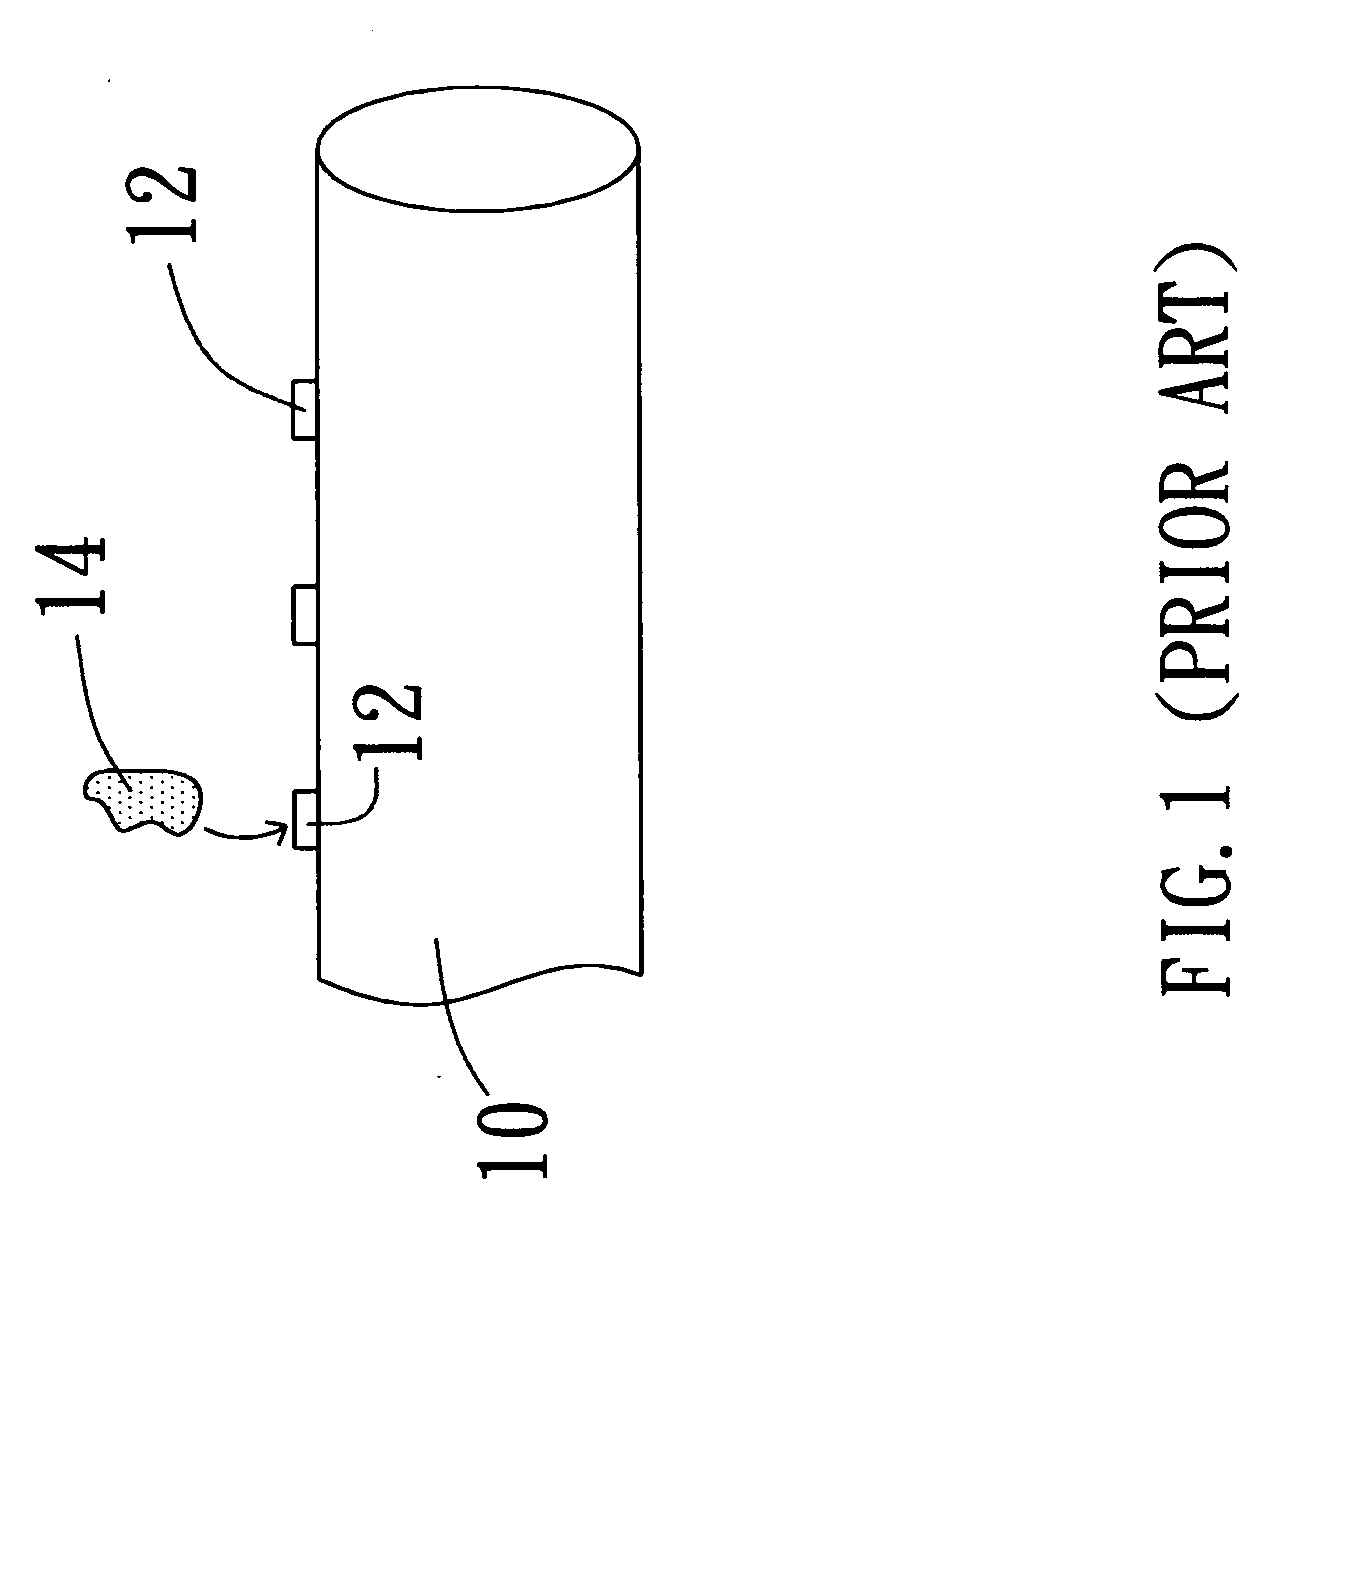 Structure and manufacturing process of a nano device transistor for a biosensor